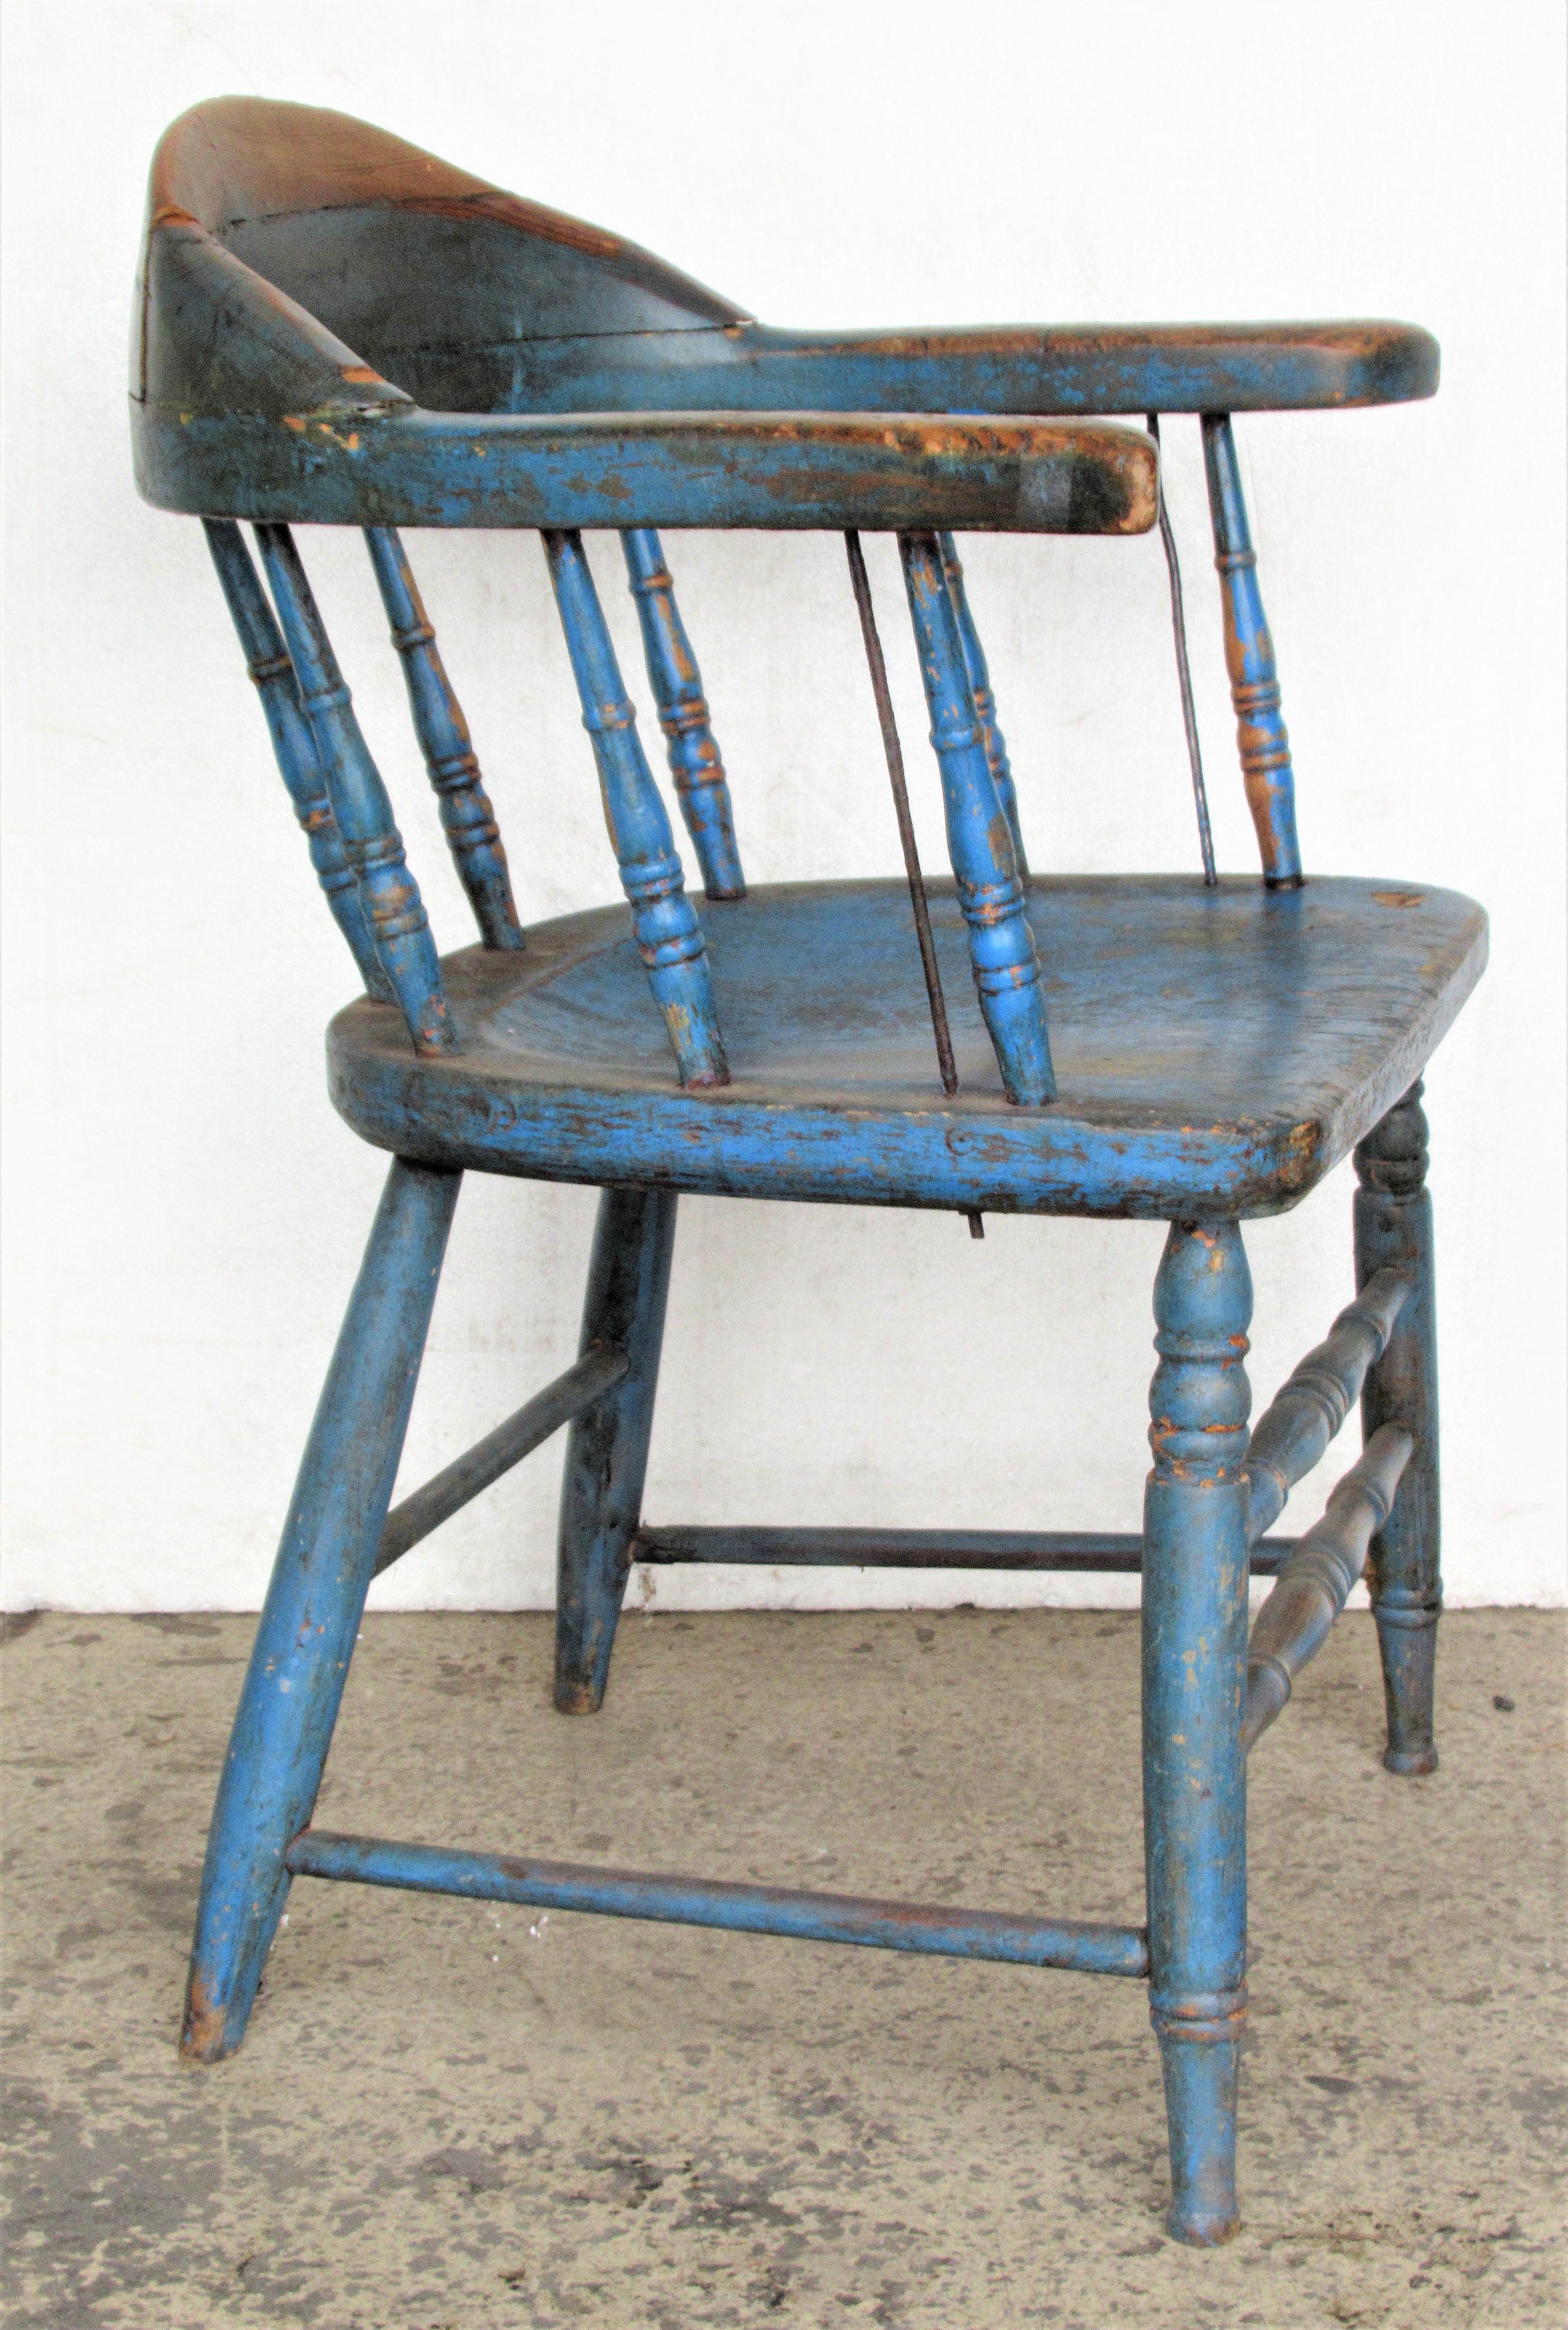 Antique American Firehouse Windsor Chair in Old Blue Paint 10